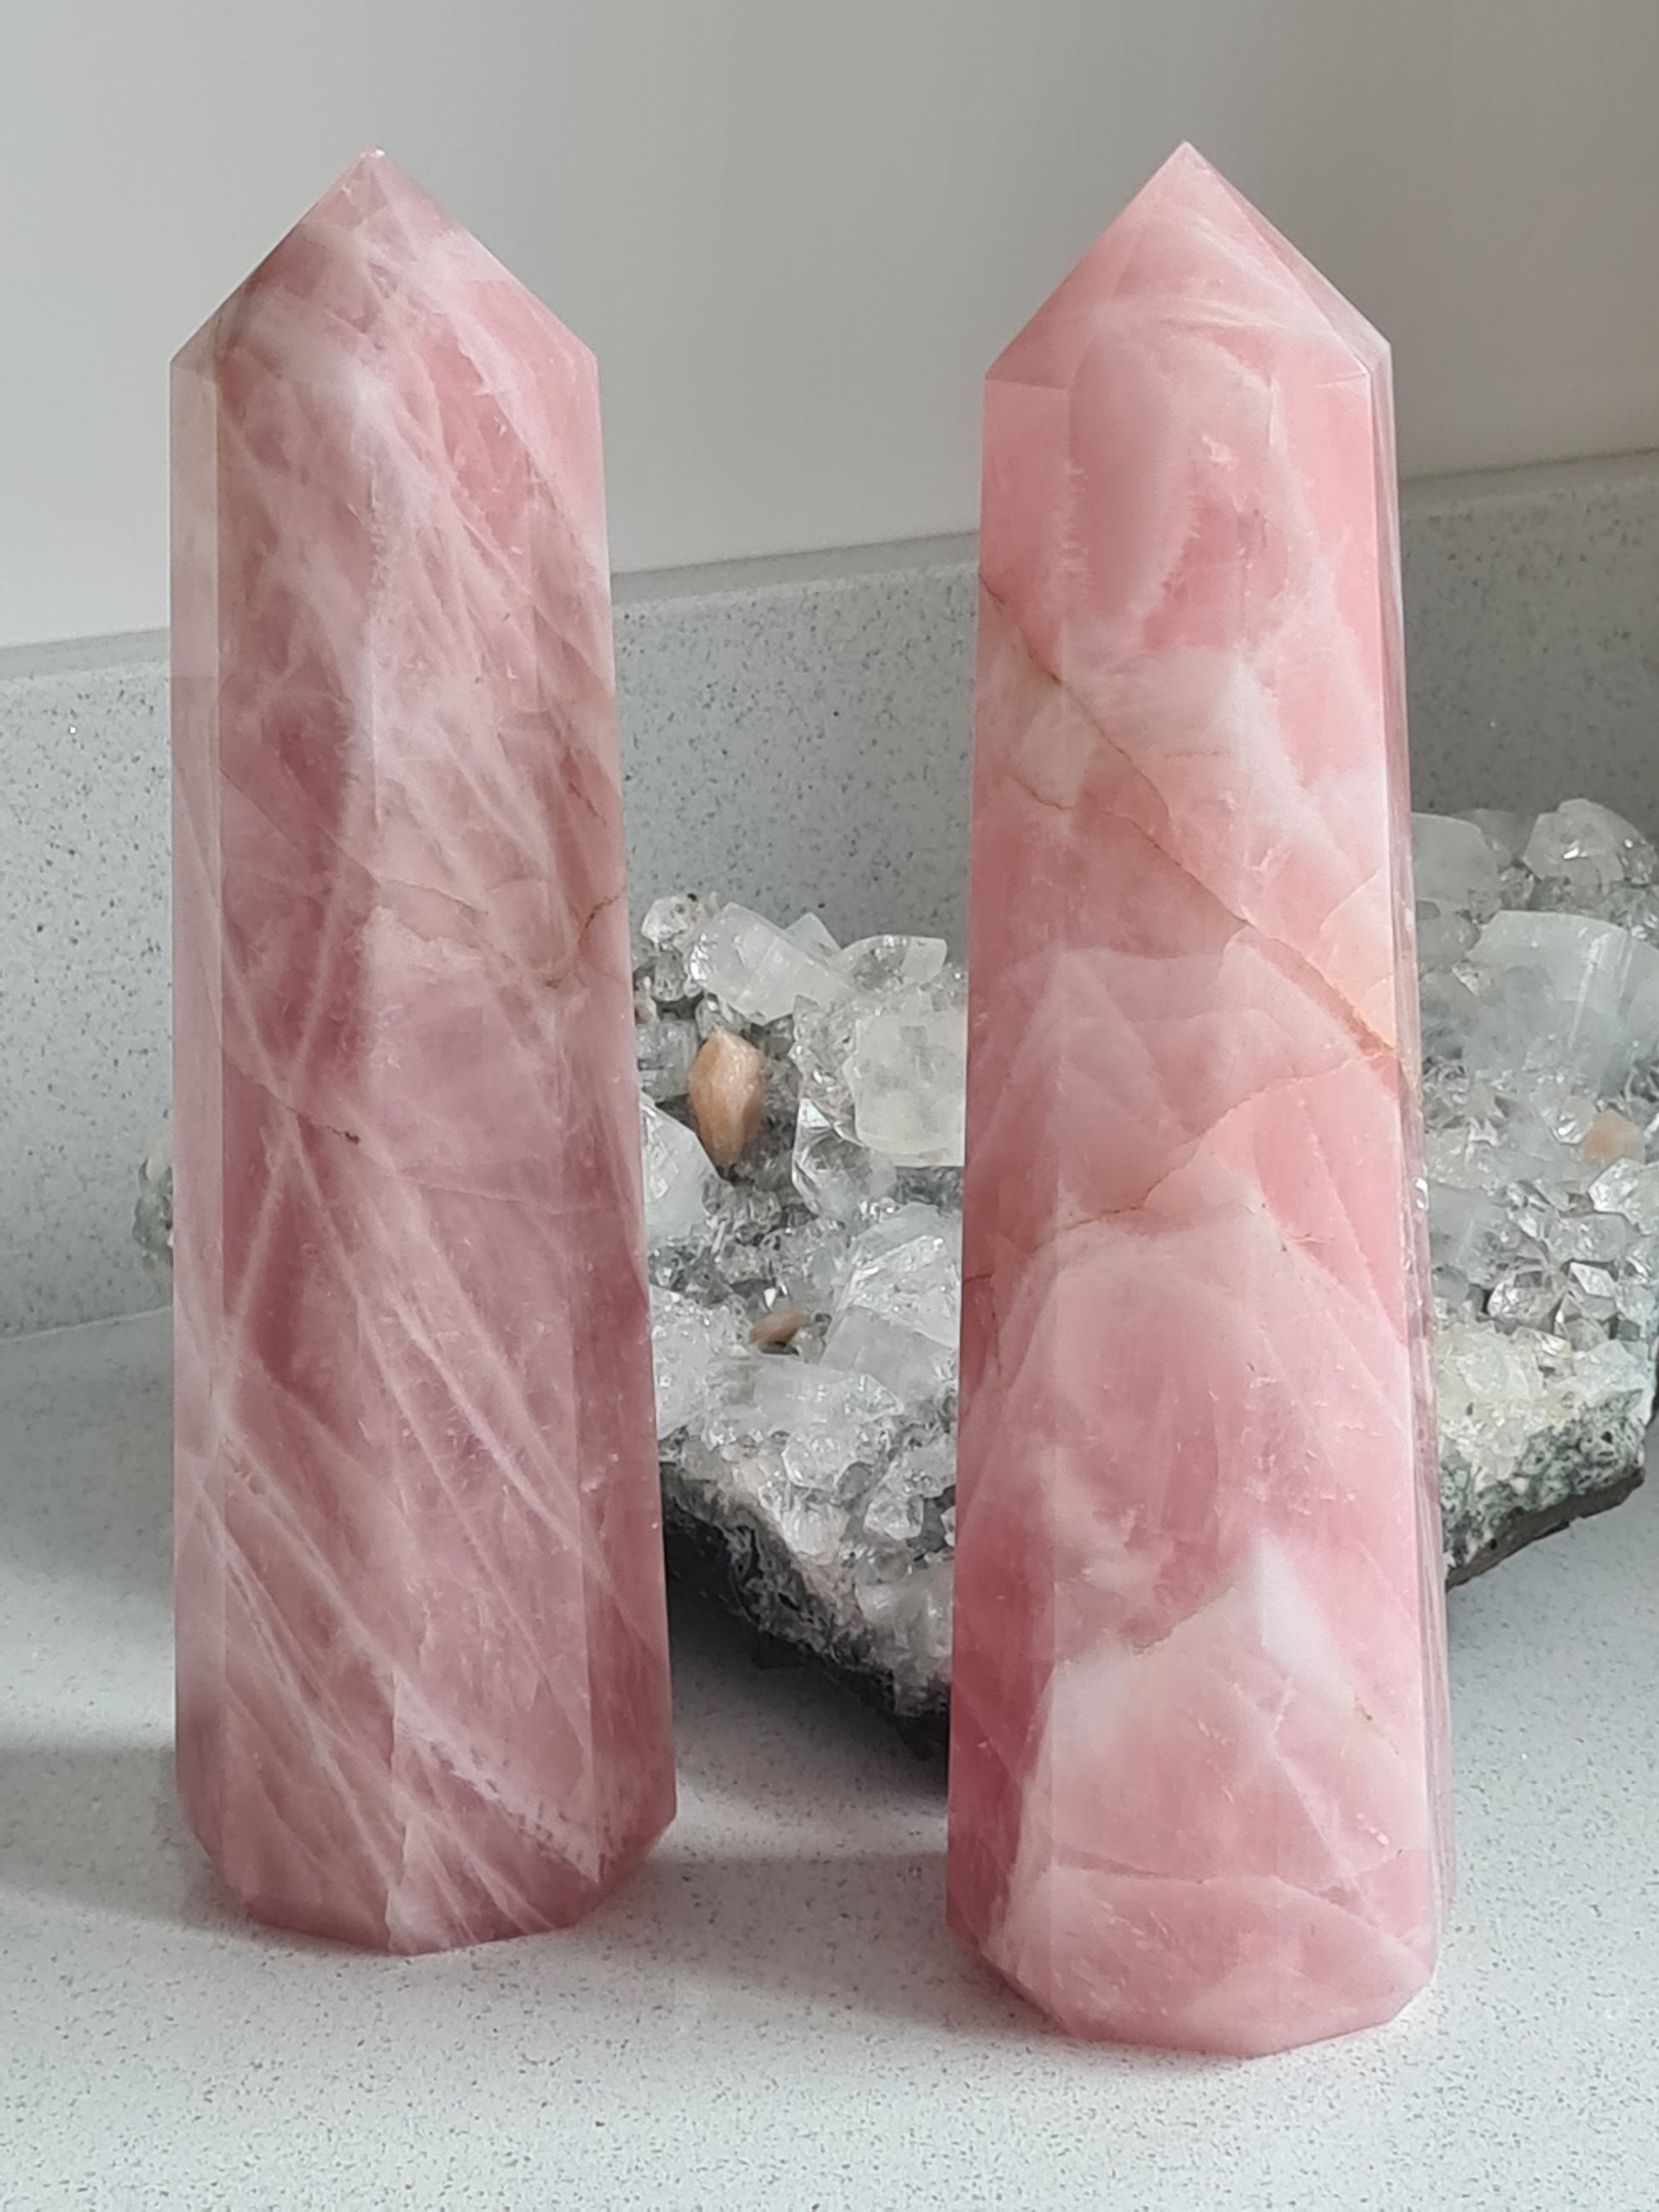 Two statement towers of rose quartz, each measuring 20cm tall